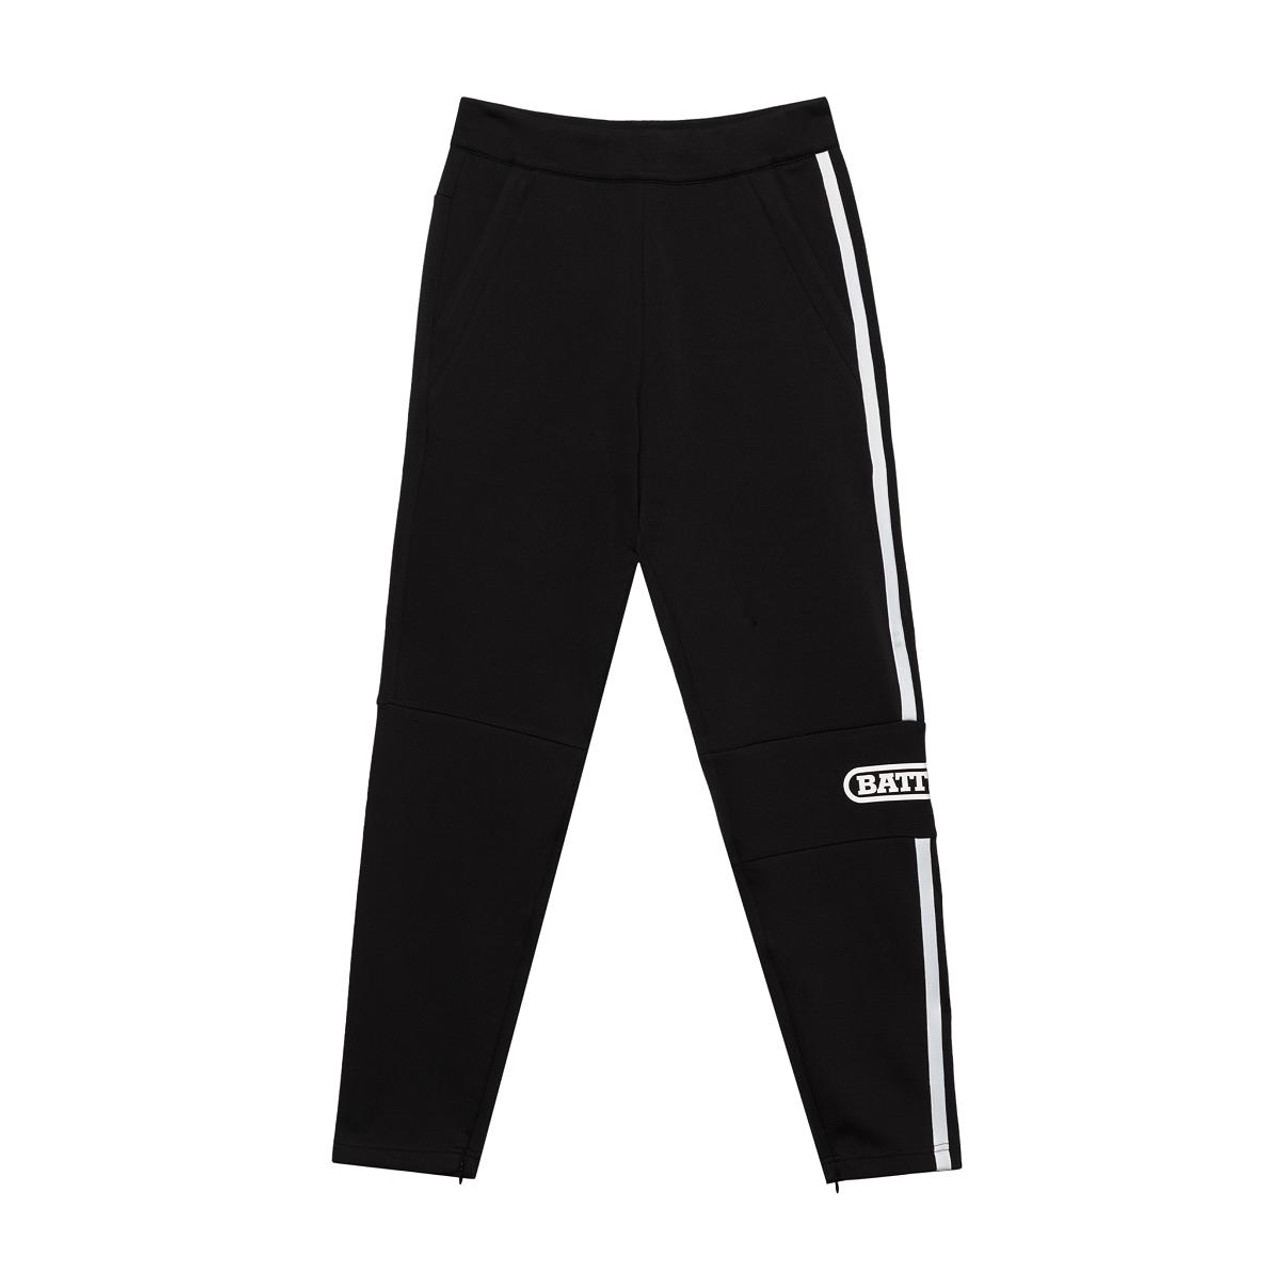 Dynamic Joggers 3.0: Comfortable, Flexible & Quick-Drying